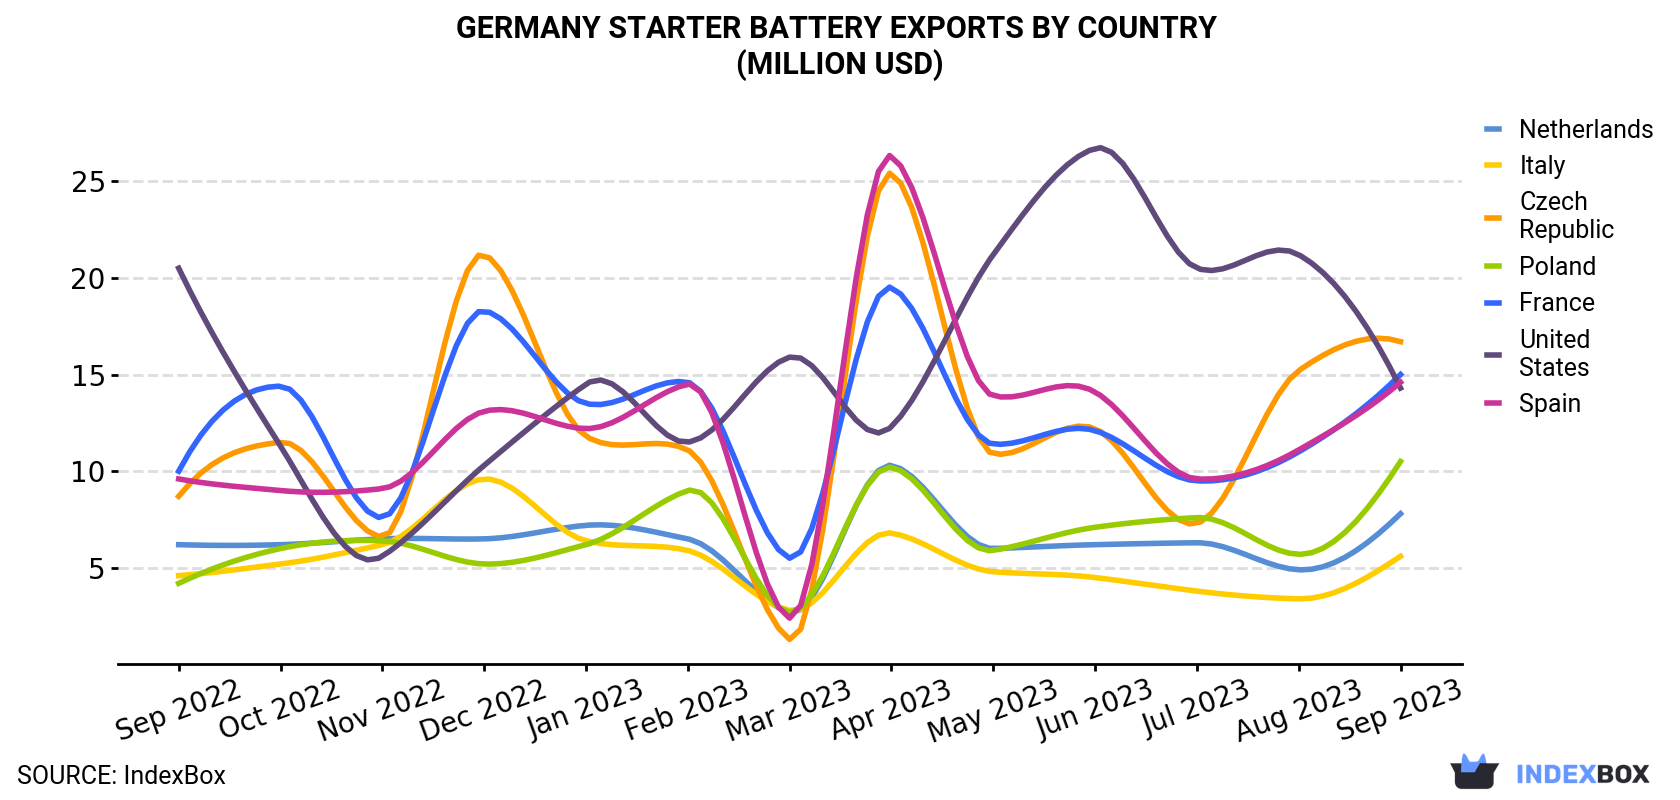 Germany Starter Battery Exports By Country (Million USD)